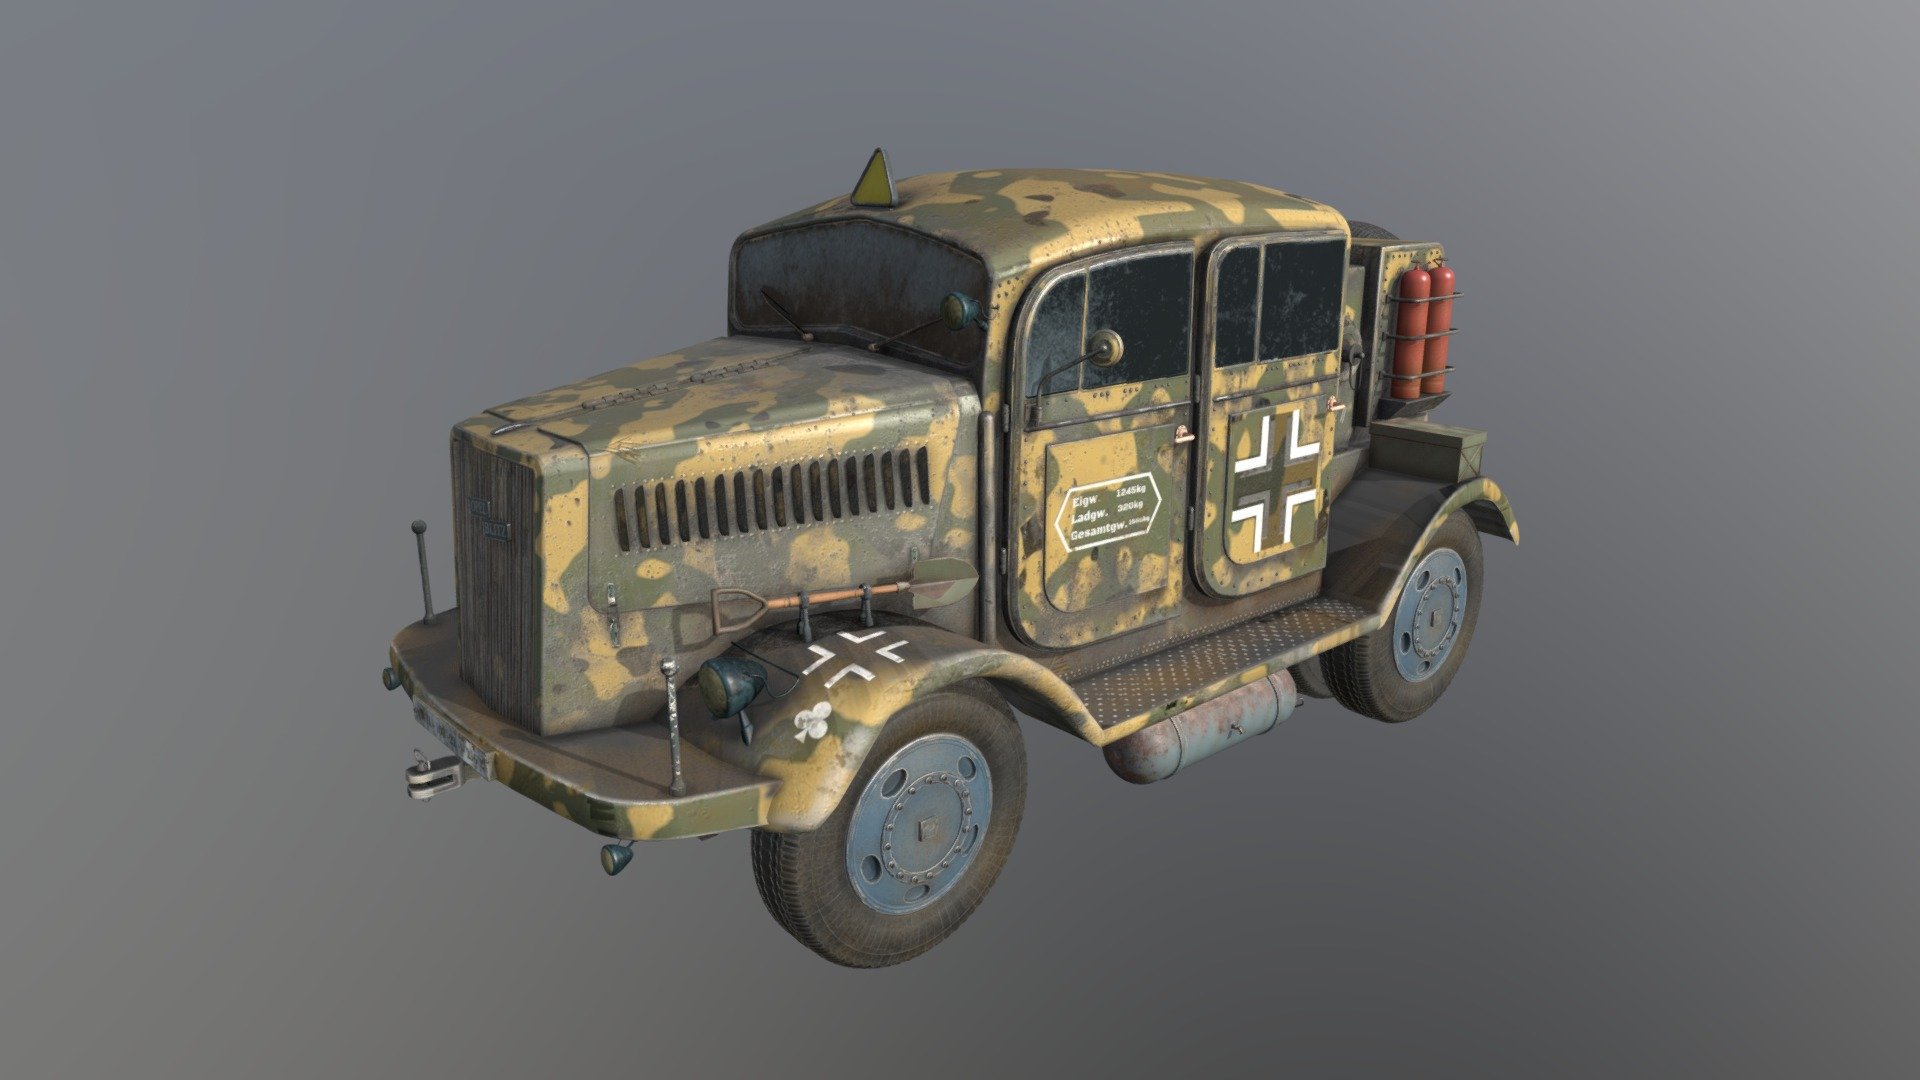 Opel Blitz truck - V2 rocket variantion with cammo.
Game ready model for unreal, unity engine. For scenes, videos, games.
Wheels with origins for animations
2k PBR  textures in substance painter - Opel Blitz truck - V2 rocket typ with cammo - Buy Royalty Free 3D model by Thomas Binder (@bindertom61) 3d model